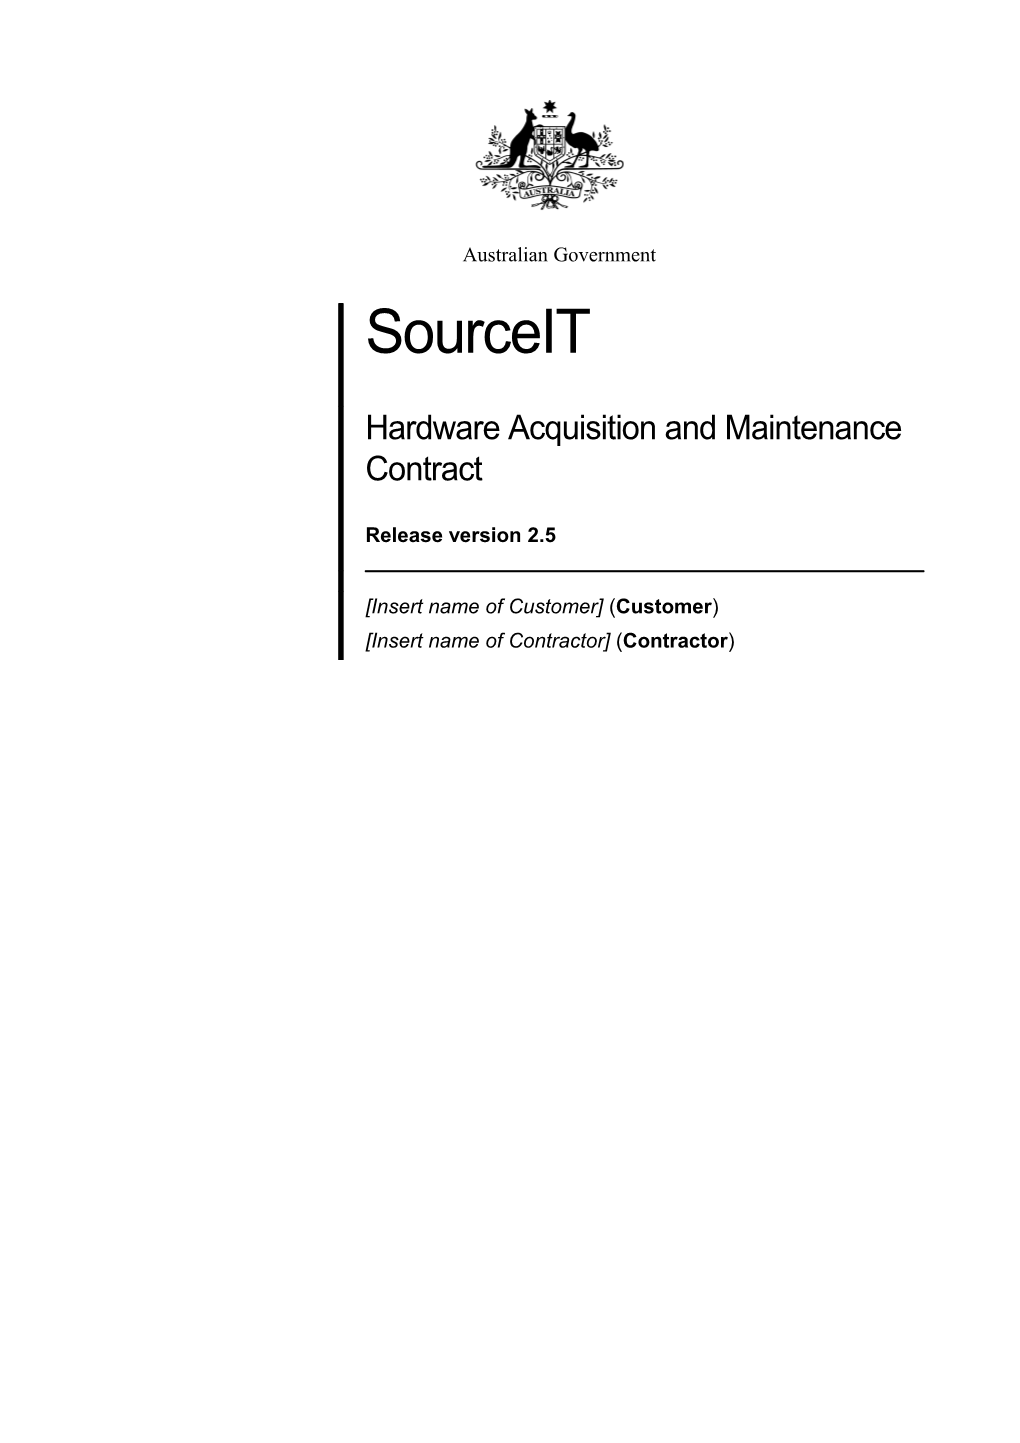 Source IT Hardware Contract - Release Version 2.3